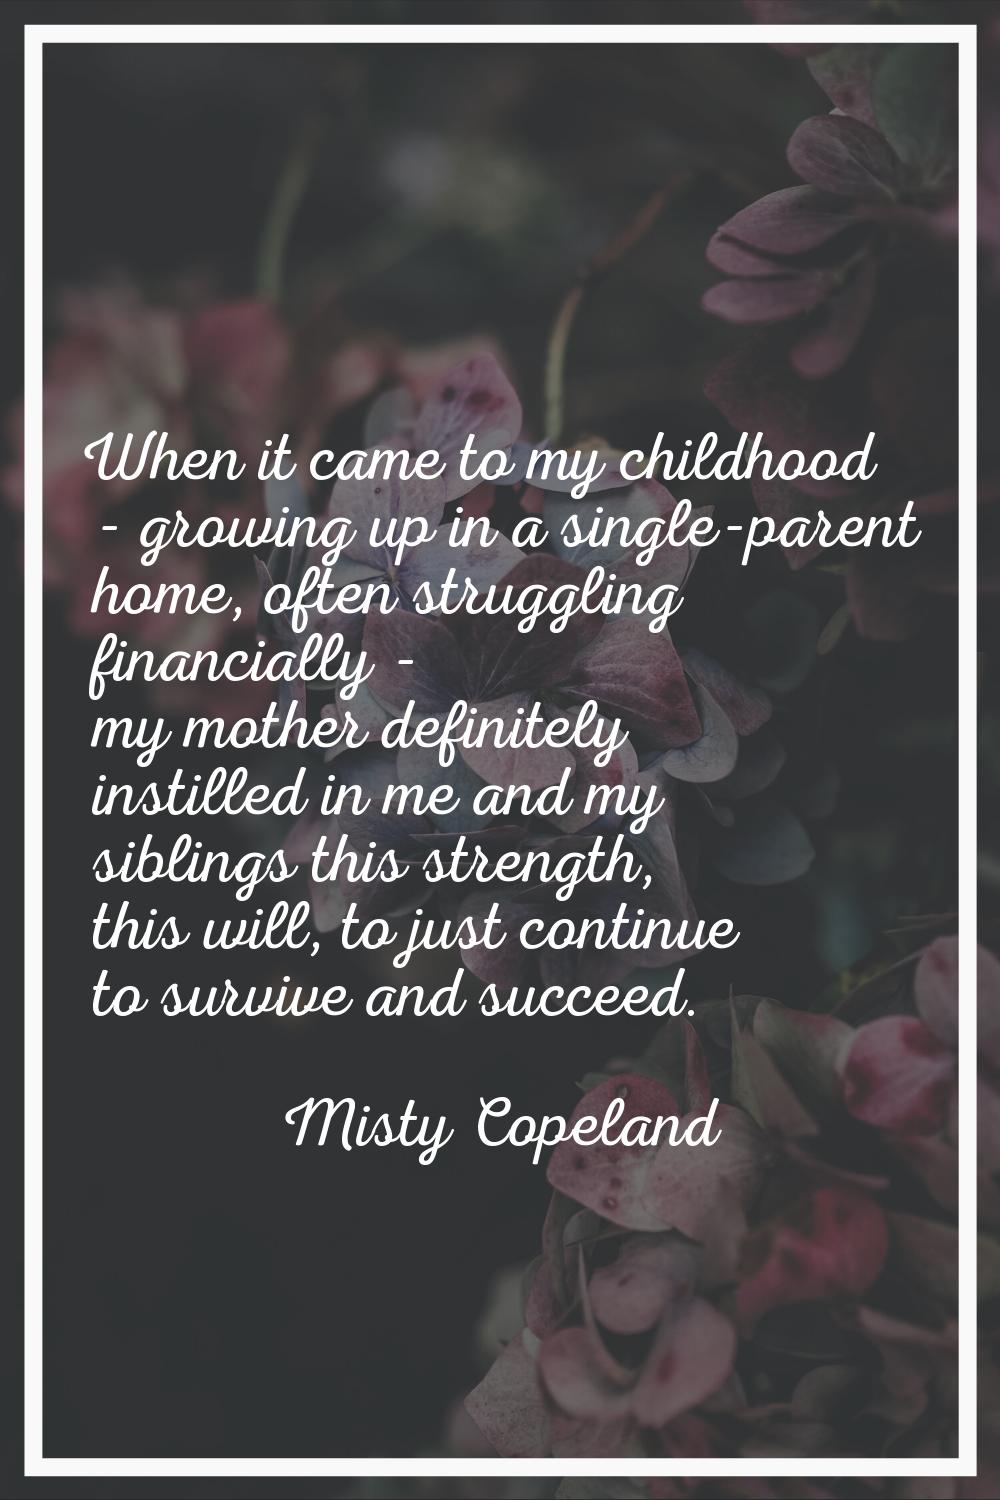 When it came to my childhood - growing up in a single-parent home, often struggling financially - m